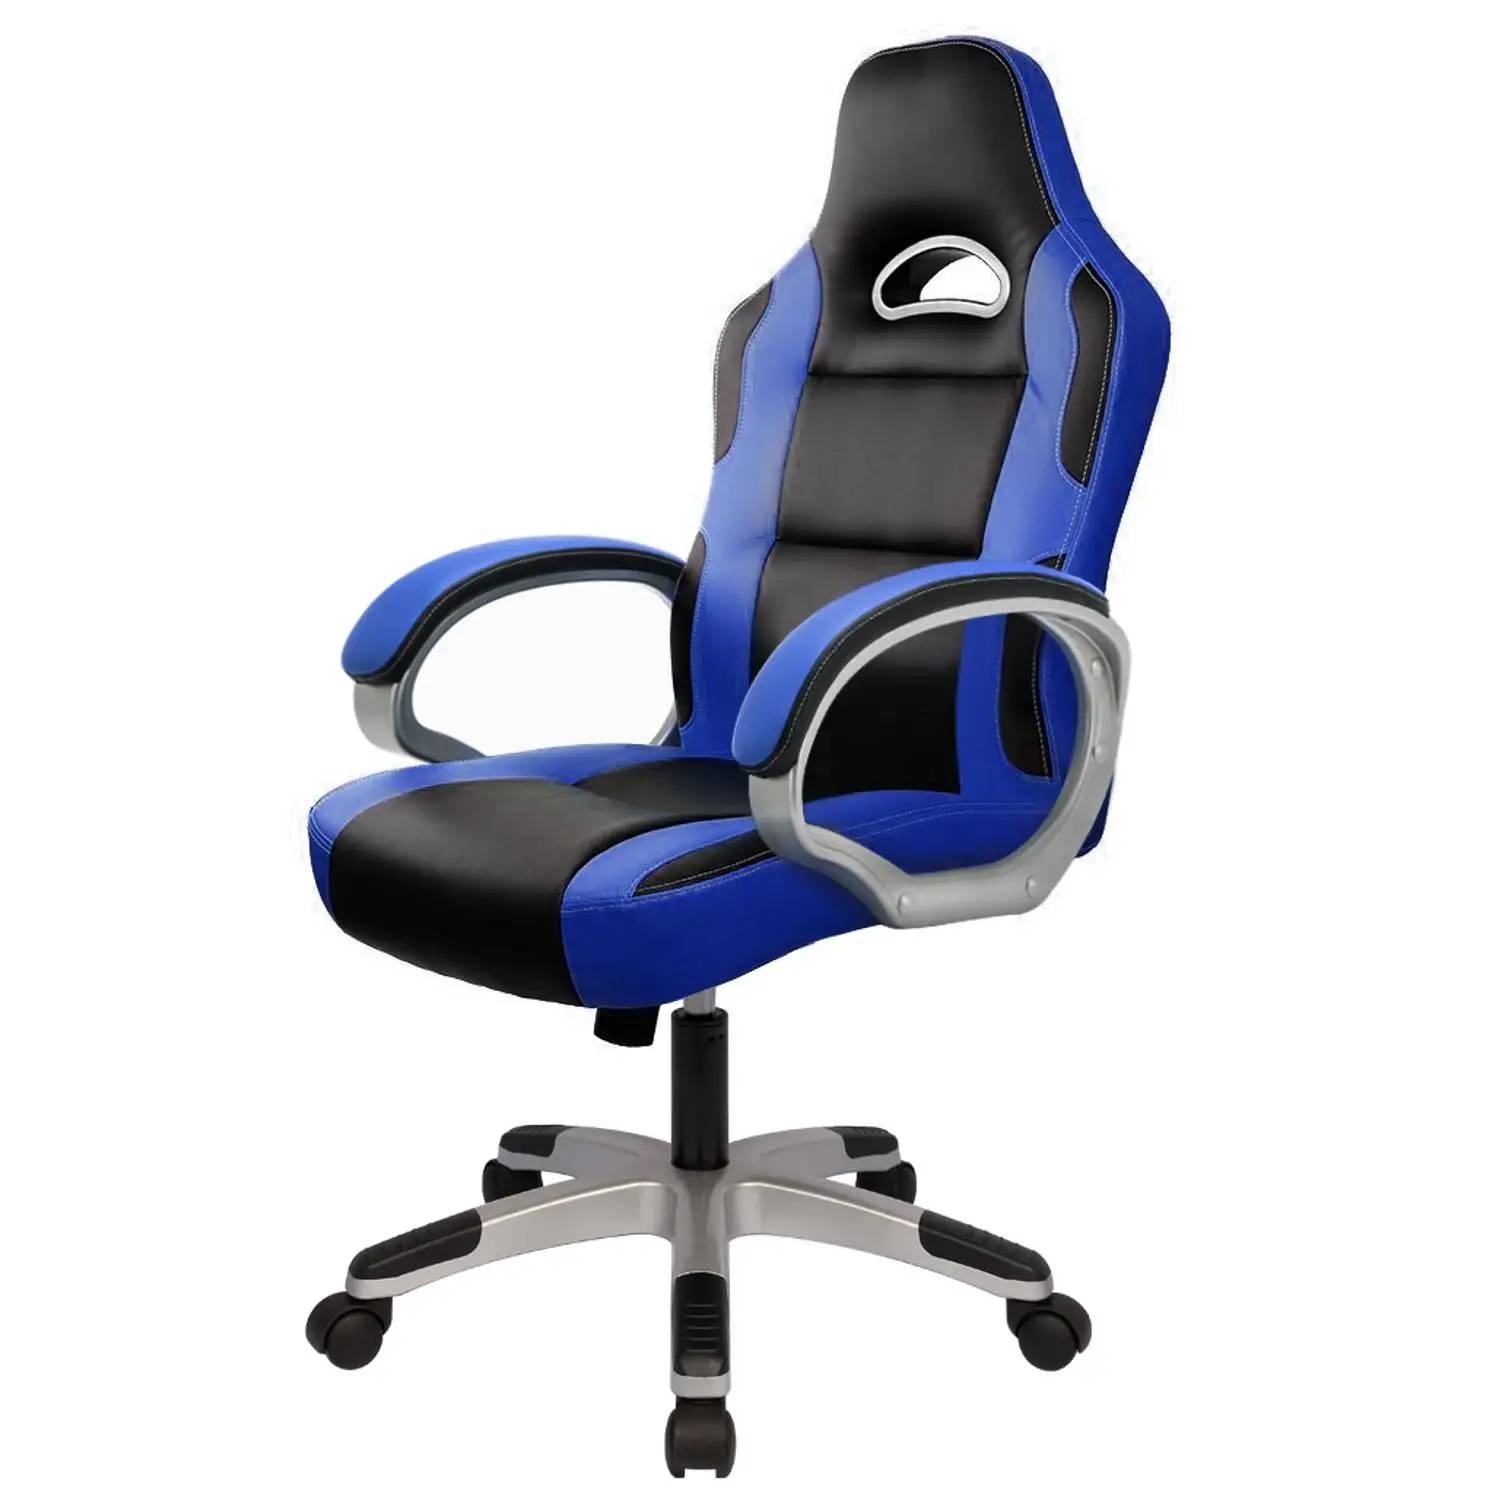  Gaming Computer Chair Executive chair Ergonomic Office PC Swivel Desk Chairs for Gamer Adults and C